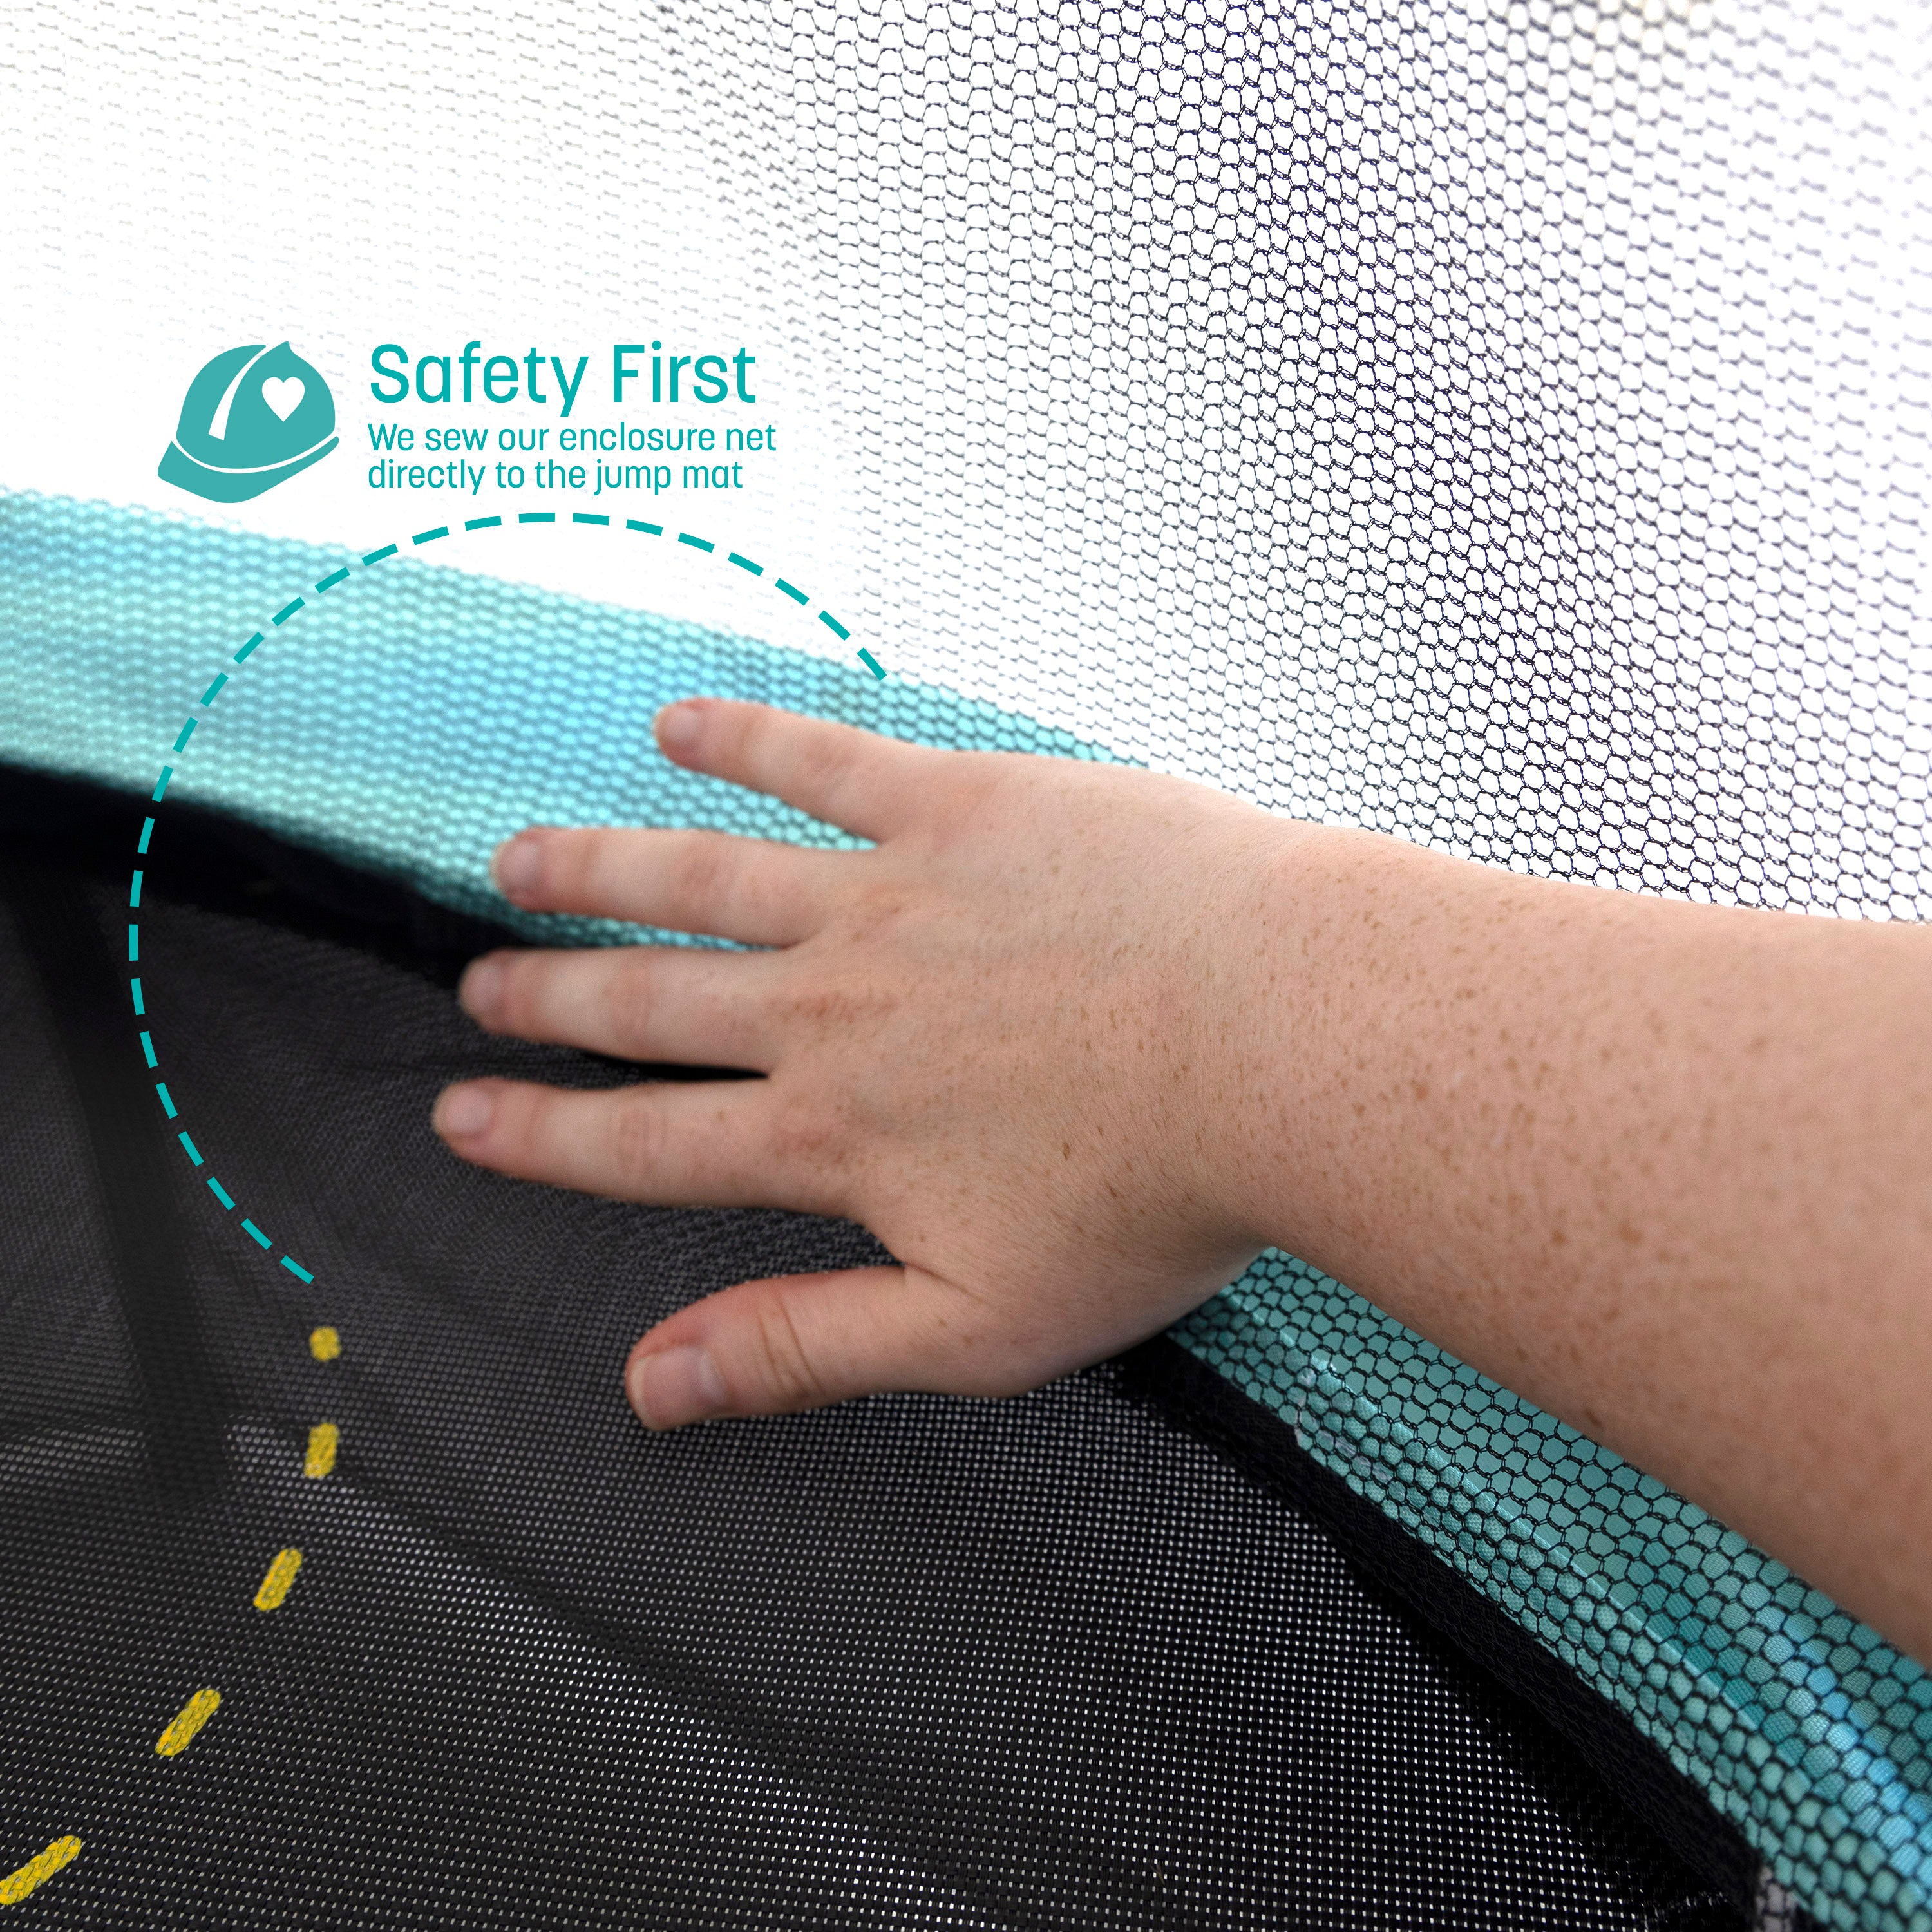 A hand pushes back the enclosure net. A teal callout feature states, “Safety First: We sew our enclosure net directly to the jump mat”.